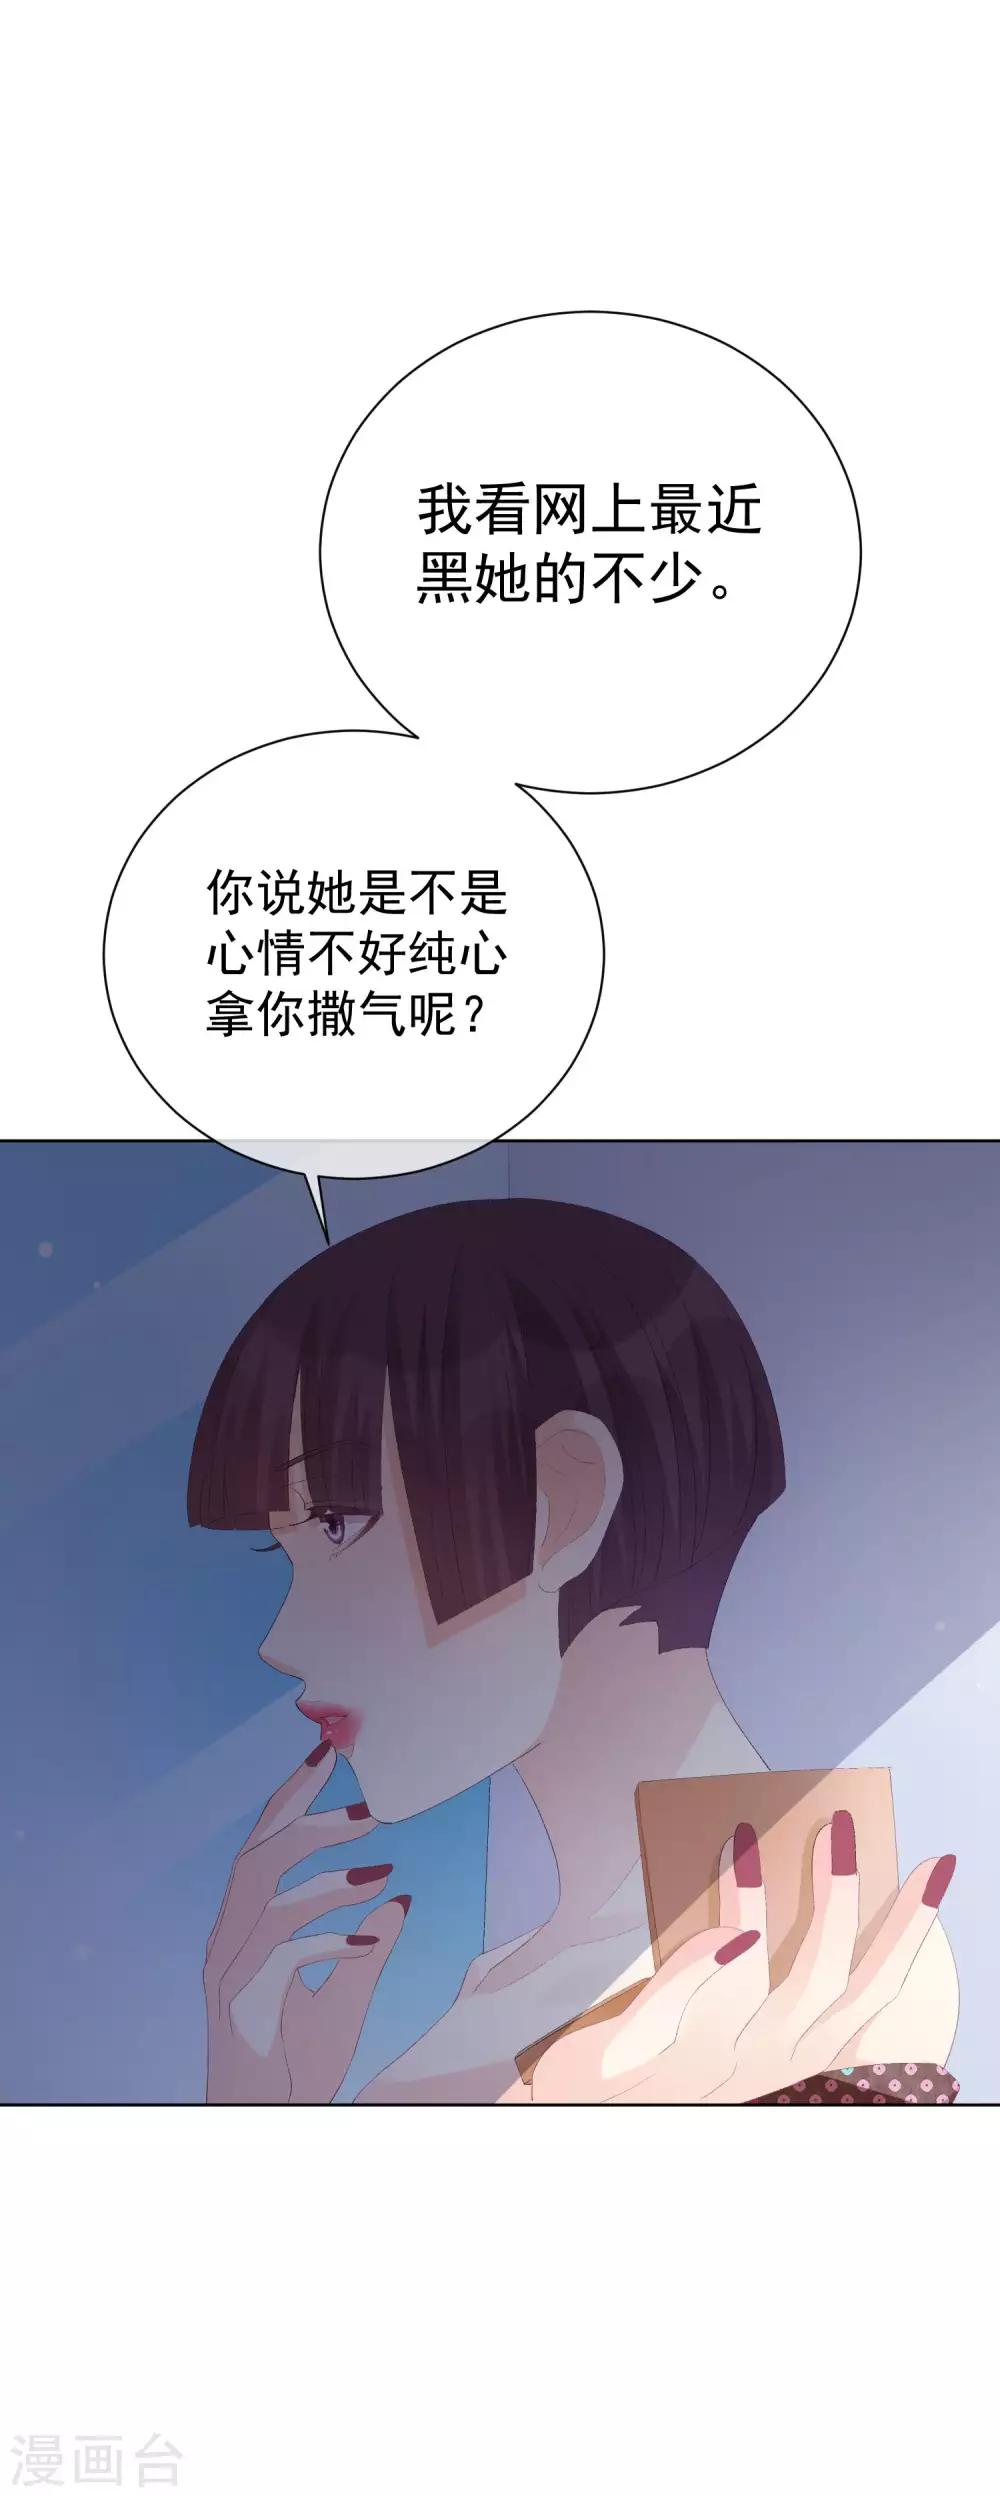 One Kiss A Day - 第36話 真正的她 - 6